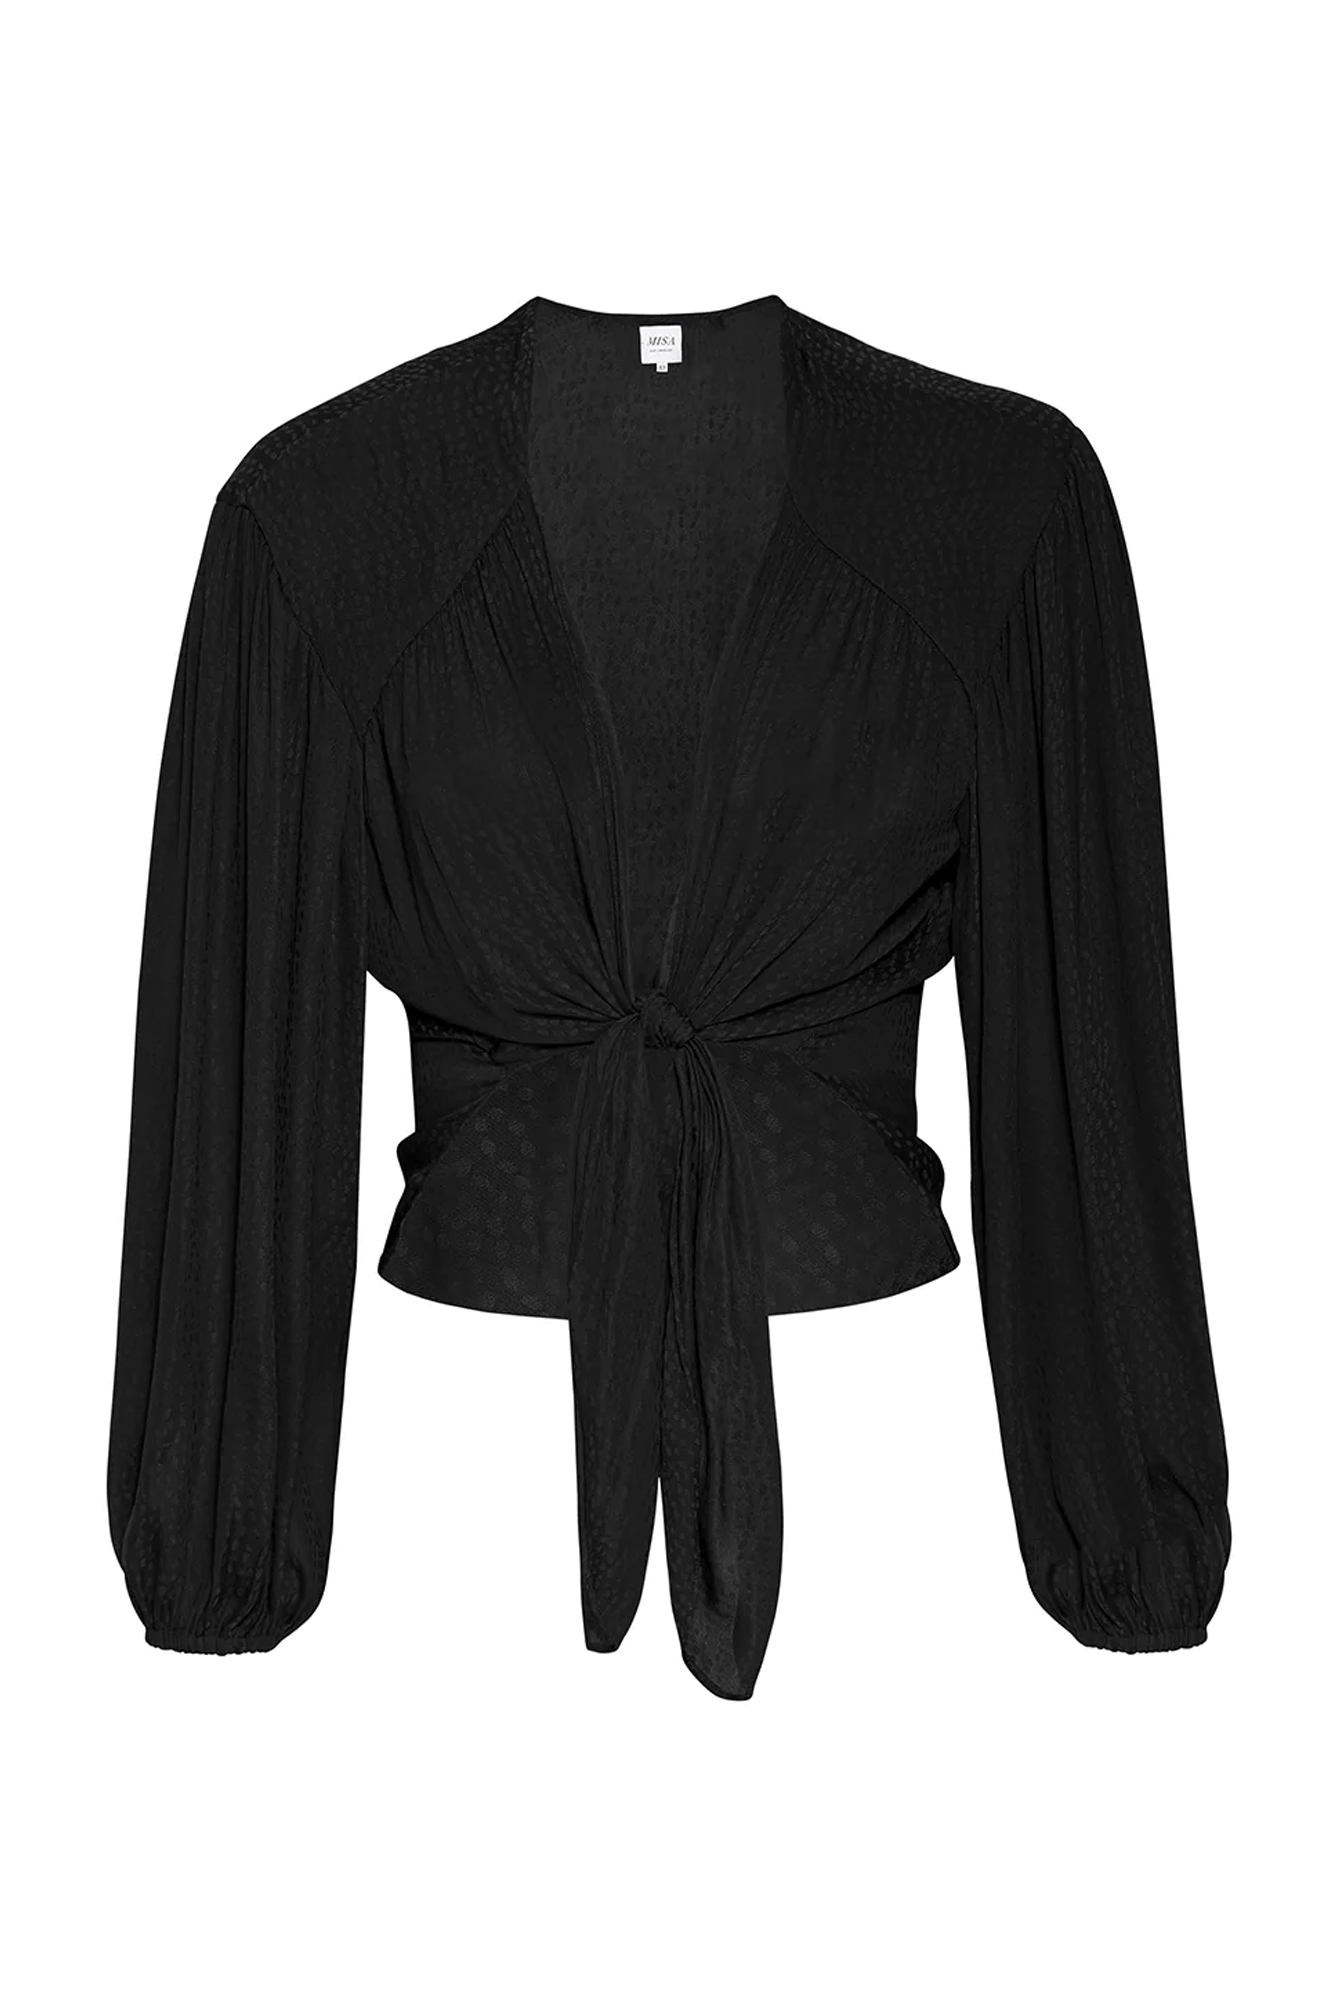 The Sylvia Top from Misa is the perfect top for any casual or formal occasion. This handcrafted, tonal black dot print satin jacquard top features an open neckline with a button snap and self-tie bodice. The long ruffled sleeves are finished off with an elastic cuff, making it stylish and comfortable. Pair with your favorite jeans for a timeless look.